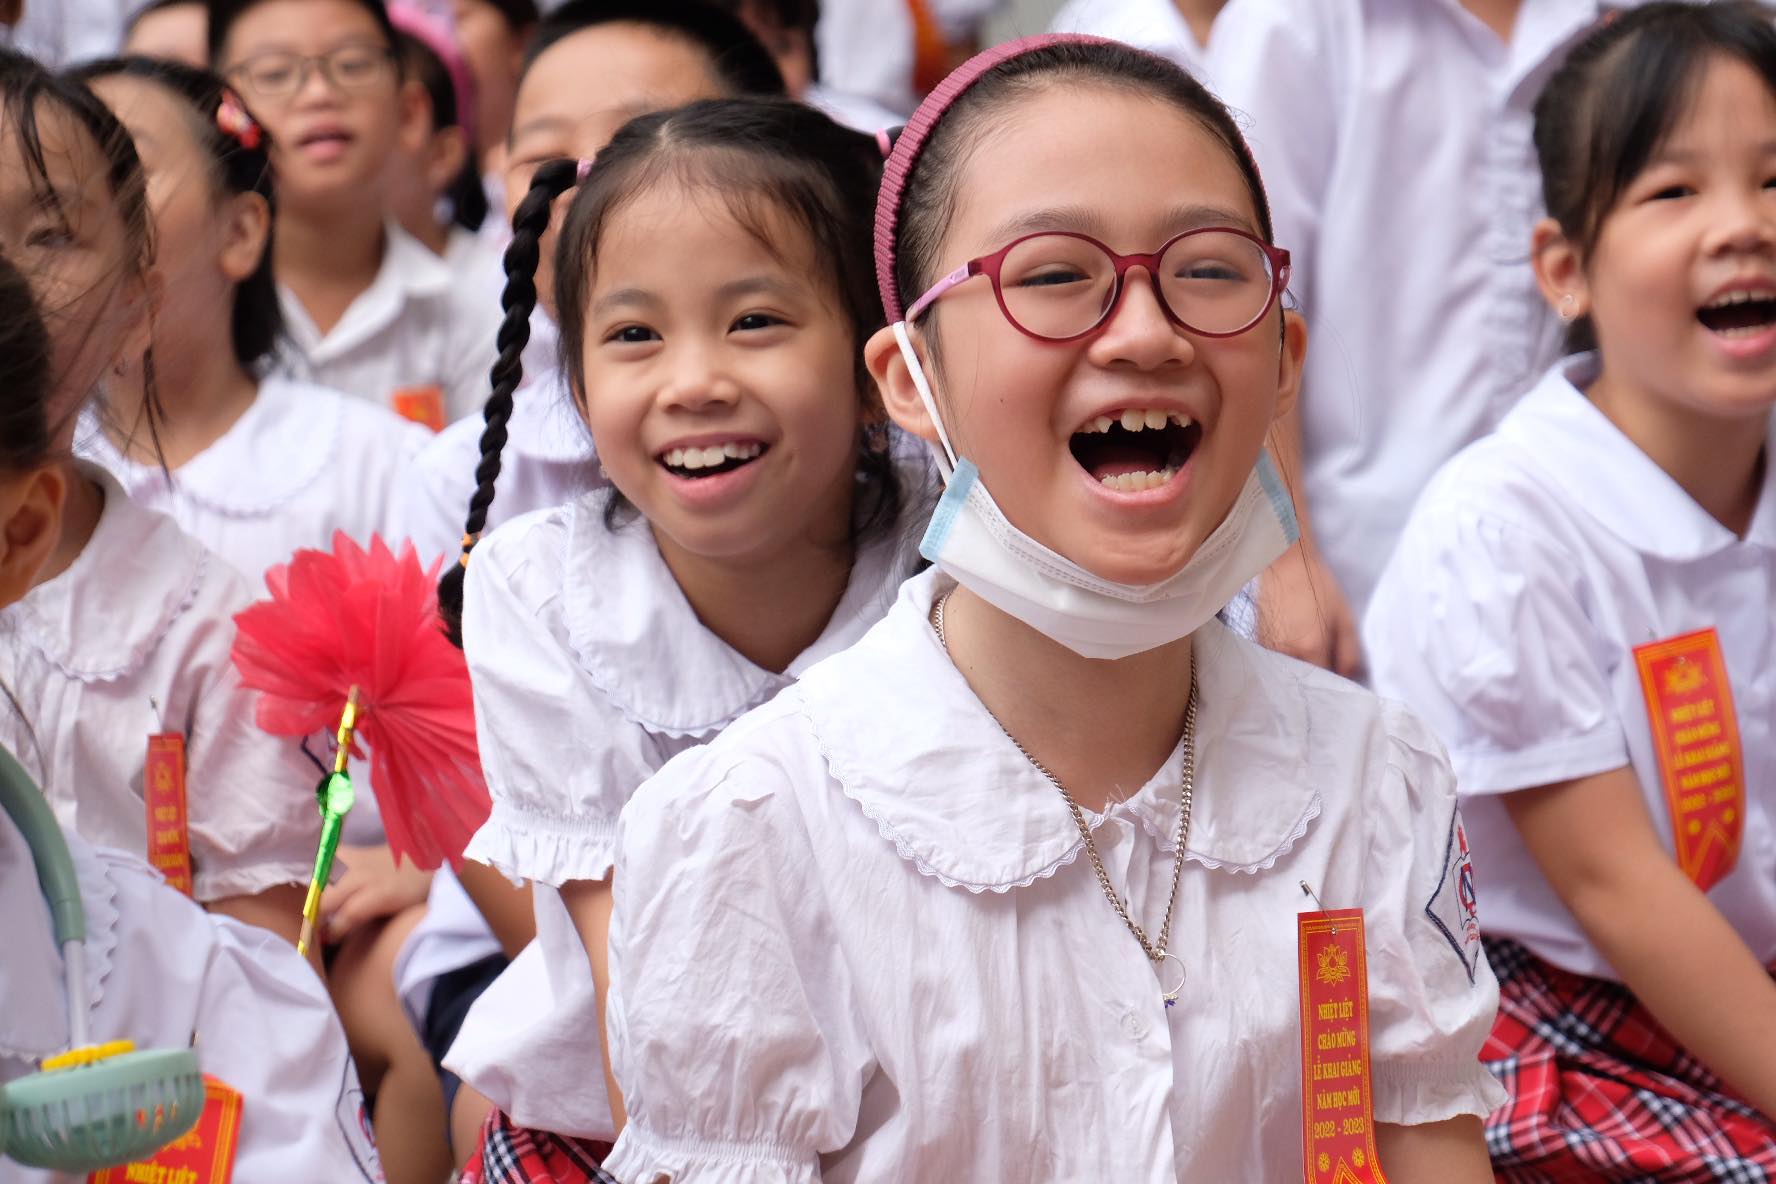 Students enjoy a performance during the school opening ceremony at Ngo Quyen Elementary School in Hai Ba Trung District, Hanoi, September 5, 2022. Photo: Nguyen Bao / Tuoi Tre